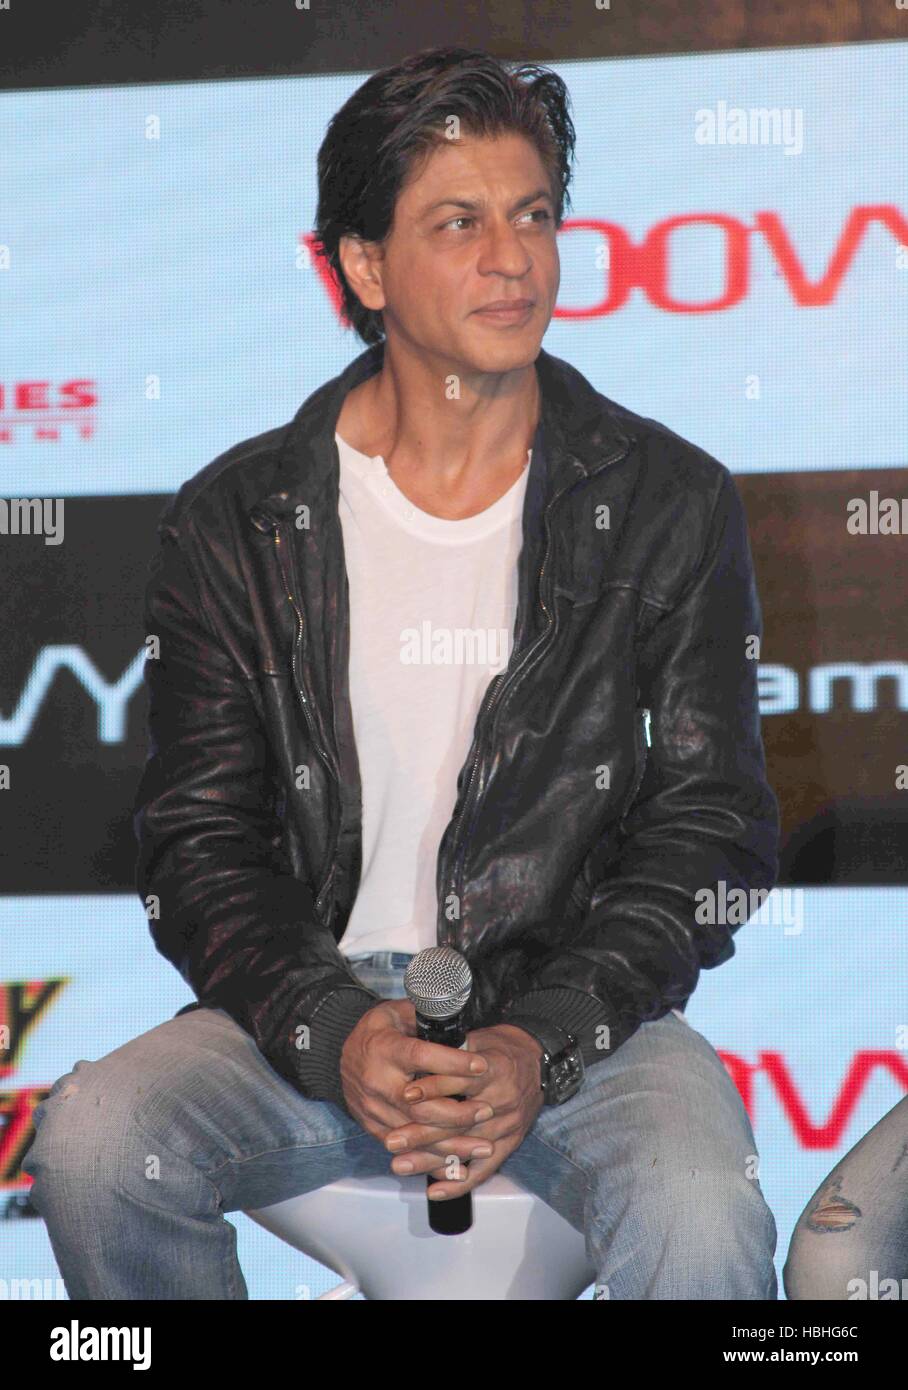 Bollywood actor Shah Rukh Khan portrait, white tshirt, black jacket, microphone in hand, at movie Happy New Year event in Mumbai, India Stock Photo